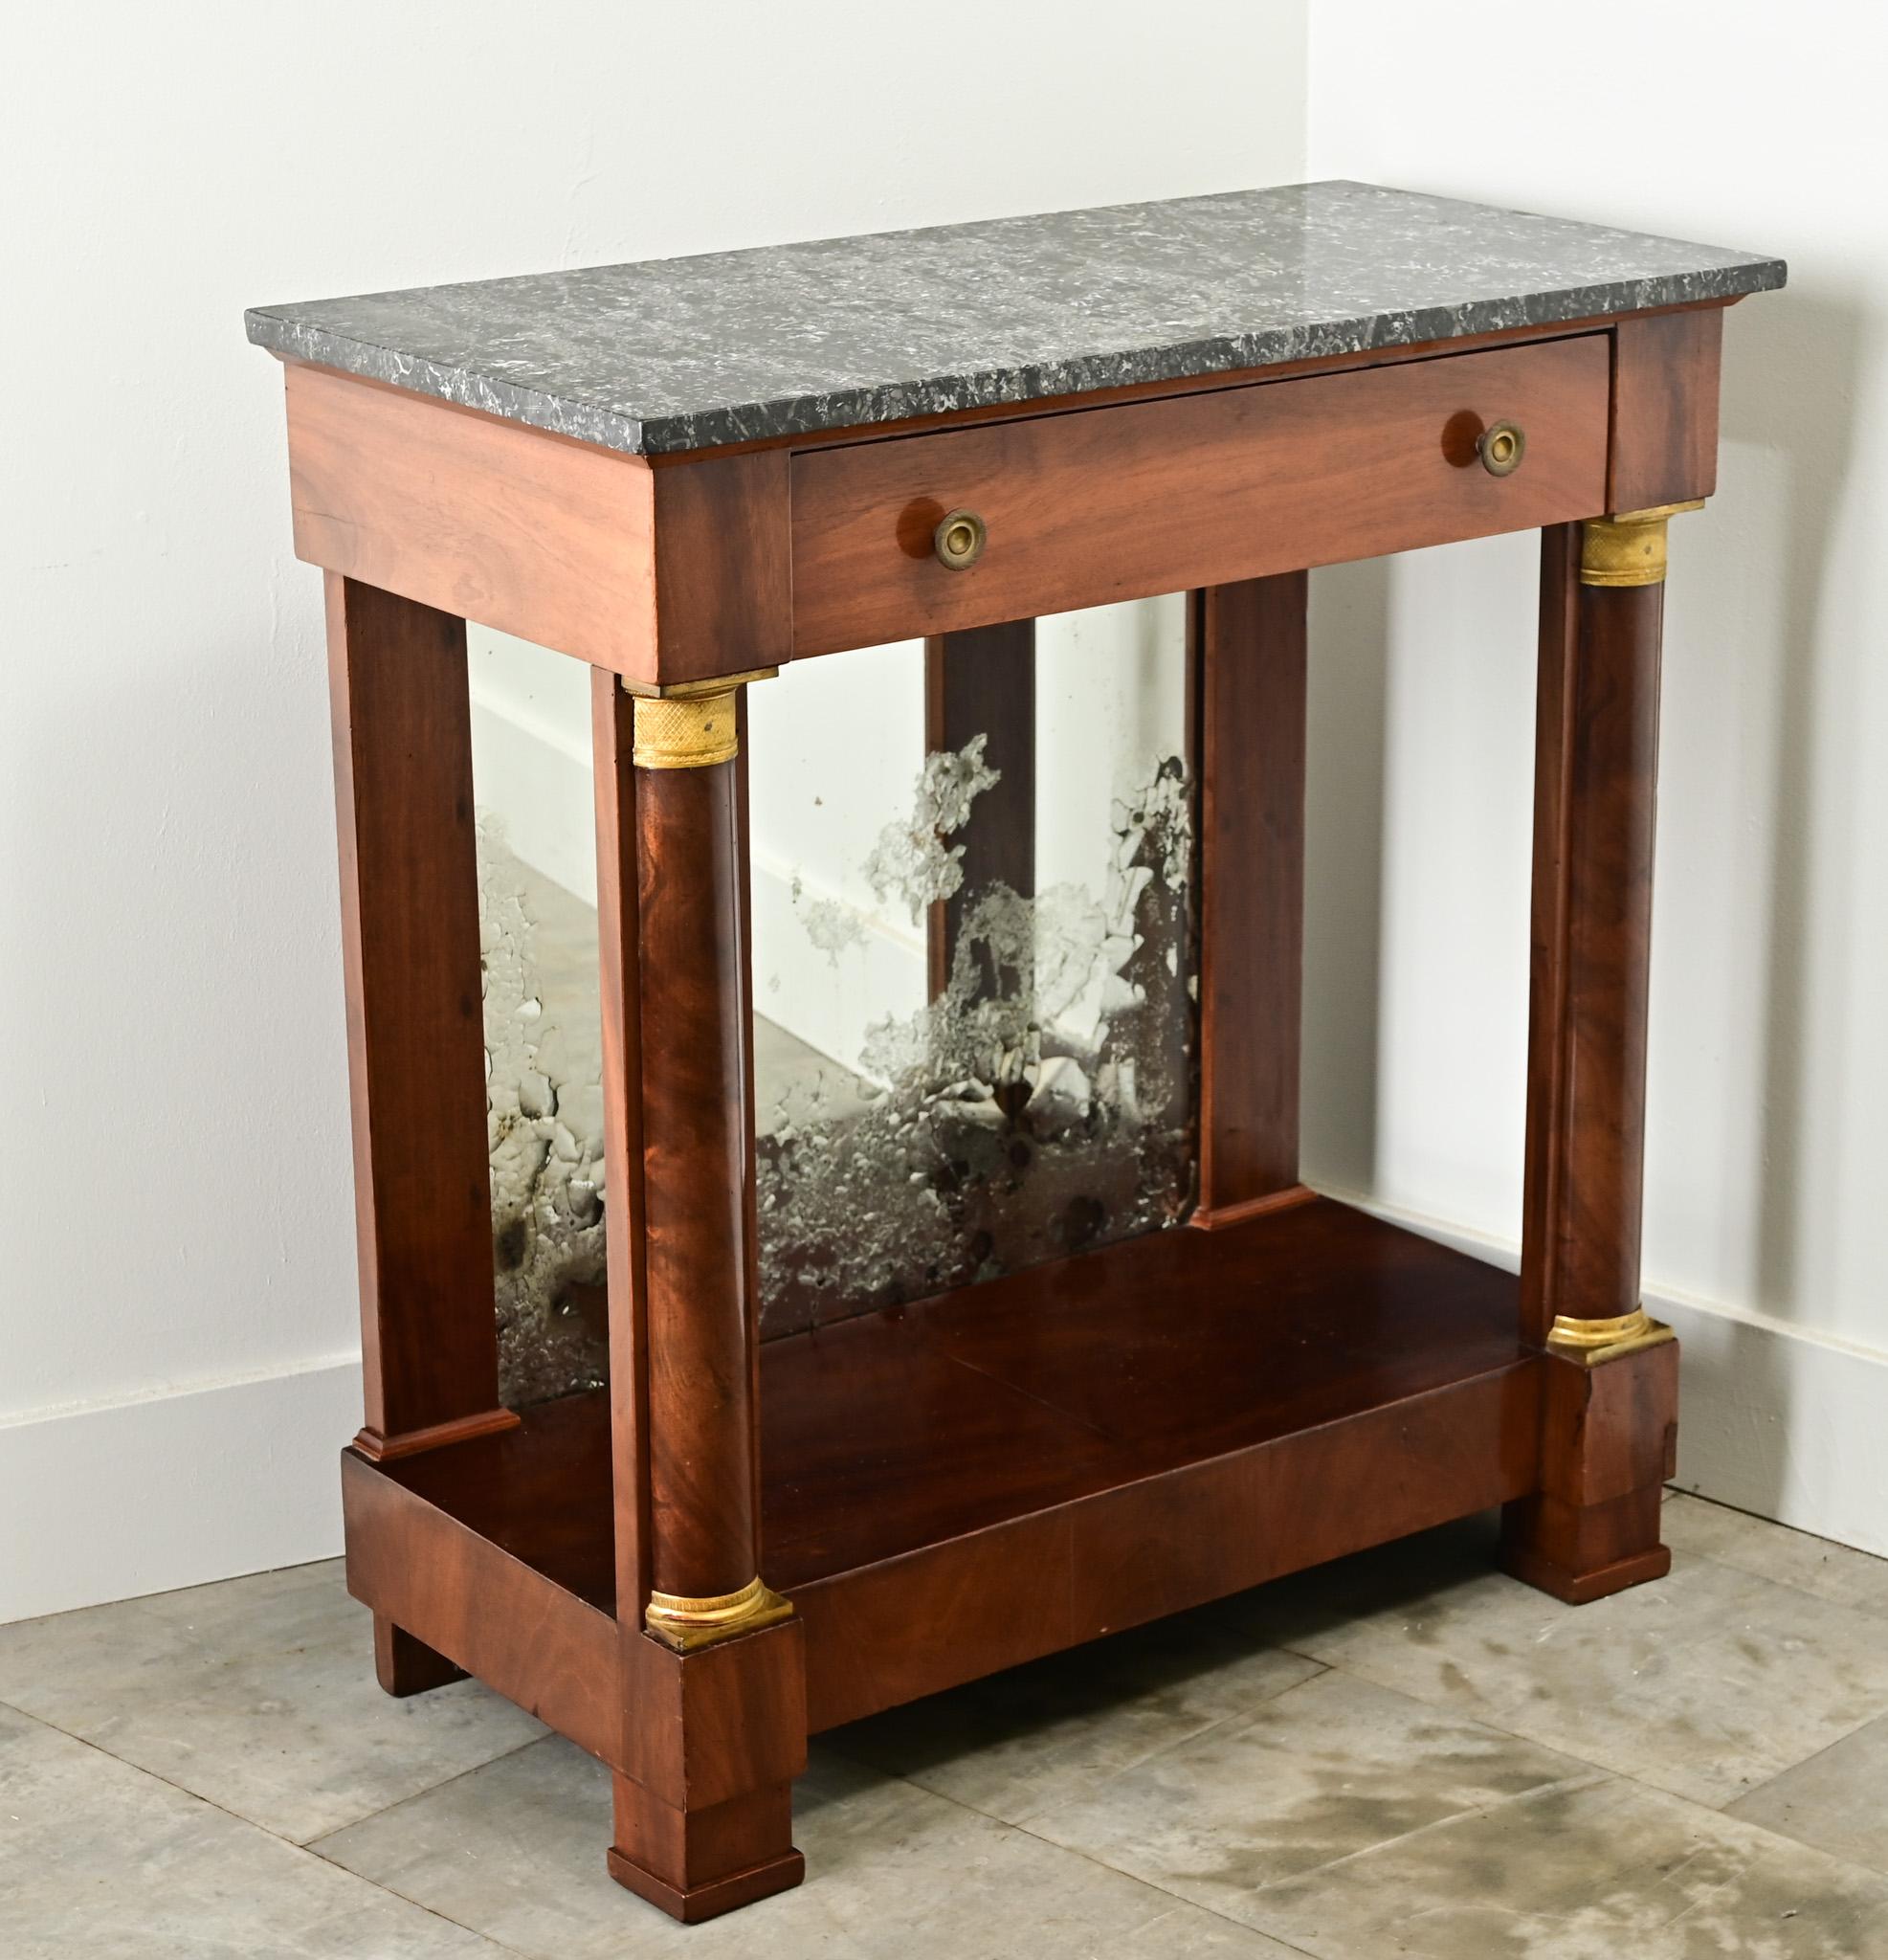 A petite French mahogany Empire console with its original marble top. A single drawer is housed in the apron over a pair of column form front legs with neoclassical style brass capitals at the top and base. Behind the console is the original mirror